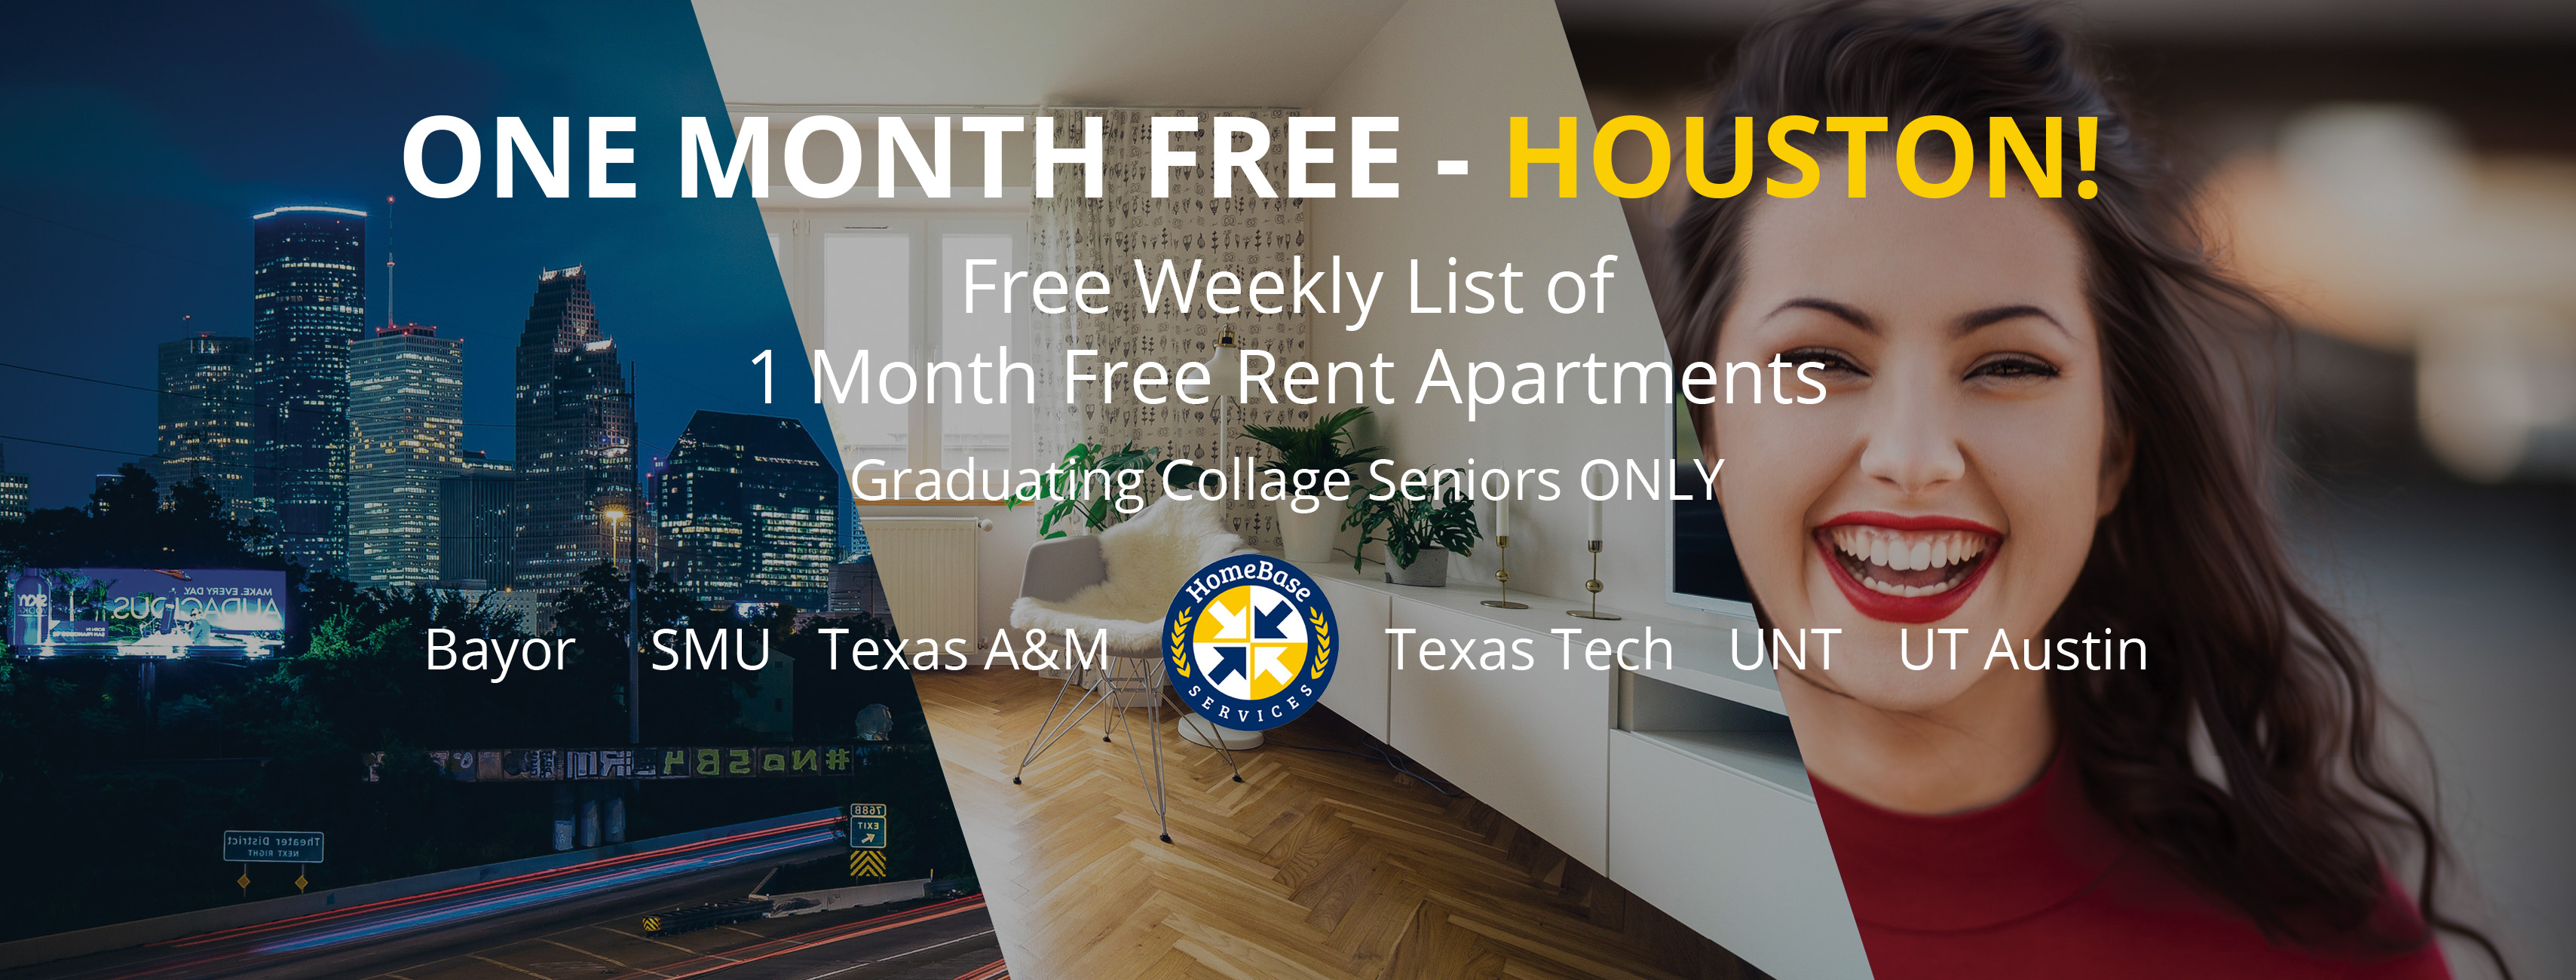 Houston Apartments Offering 1 month Free – Weekly Specials – As of March 22, 2018